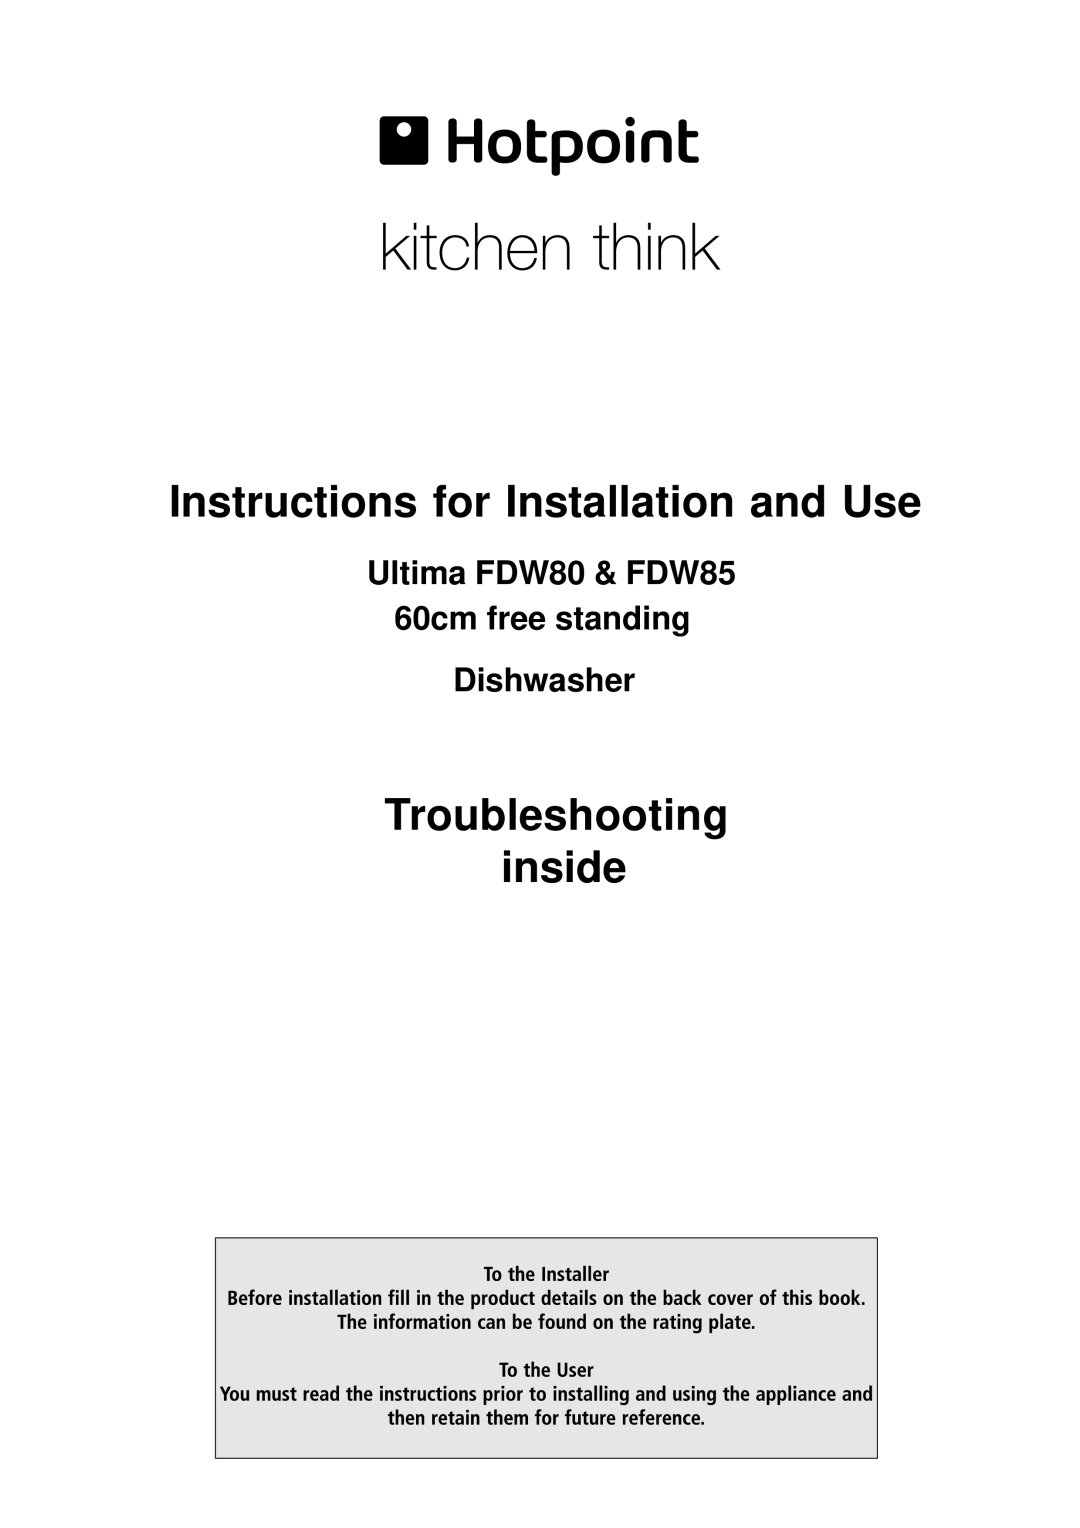 Hotpoint FDW80 manual Instructions for Installation and Use, Troubleshooting inside, Dishwasher 